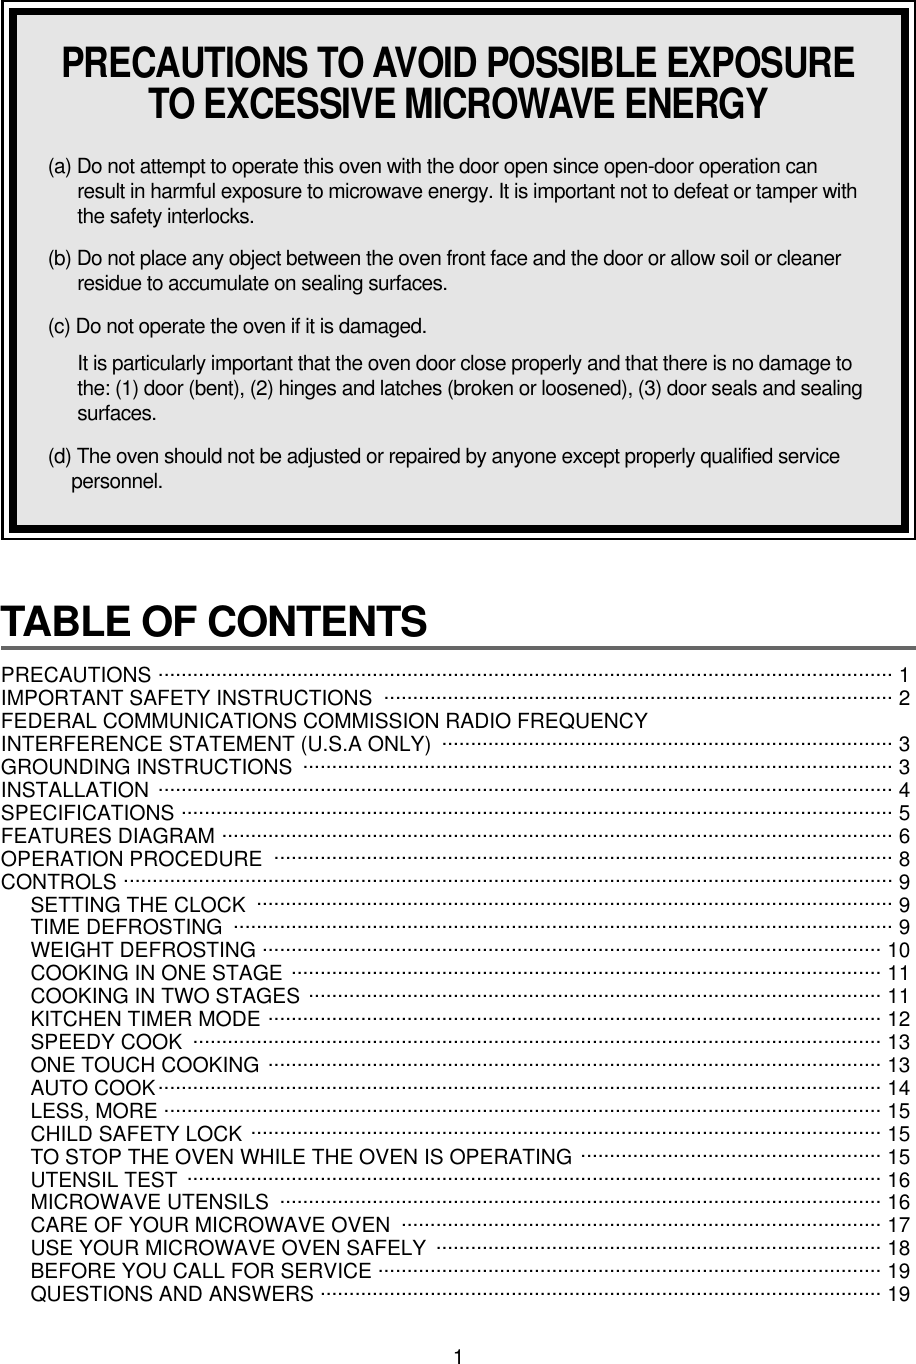 1TABLE OF CONTENTS PRECAUTIONS ............................................................................................................................... 1 IMPORTANT SAFETY INSTRUCTIONS  ........................................................................................ 2FEDERAL COMMUNICATIONS COMMISSION RADIO FREQUENCY INTERFERENCE STATEMENT (U.S.A ONLY)  .............................................................................. 3GROUNDING INSTRUCTIONS  ...................................................................................................... 3INSTALLATION ............................................................................................................................... 4SPECIFICATIONS ........................................................................................................................... 5FEATURES DIAGRAM .................................................................................................................... 6OPERATION PROCEDURE ........................................................................................................... 8CONTROLS ..................................................................................................................................... 9SETTING THE CLOCK .............................................................................................................. 9TIME DEFROSTING .................................................................................................................. 9WEIGHT DEFROSTING ........................................................................................................... 10COOKING IN ONE STAGE ...................................................................................................... 11COOKING IN TWO STAGES ................................................................................................... 11KITCHEN TIMER MODE .......................................................................................................... 12SPEEDY COOK  ....................................................................................................................... 13ONE TOUCH COOKING .......................................................................................................... 13AUTO COOK............................................................................................................................. 14LESS, MORE ............................................................................................................................ 15CHILD SAFETY LOCK ............................................................................................................. 15TO STOP THE OVEN WHILE THE OVEN IS OPERATING .................................................... 15UTENSIL TEST ........................................................................................................................ 16MICROWAVE UTENSILS  ........................................................................................................ 16CARE OF YOUR MICROWAVE OVEN  ................................................................................... 17USE YOUR MICROWAVE OVEN SAFELY  ............................................................................. 18BEFORE YOU CALL FOR SERVICE ....................................................................................... 19QUESTIONS AND ANSWERS ................................................................................................. 19PRECAUTIONS TO AVOID POSSIBLE EXPOSURETO EXCESSIVE MICROWAVE ENERGY(a) Do not attempt to operate this oven with the door open since open-door operation canresult in harmful exposure to microwave energy. It is important not to defeat or tamper withthe safety interlocks.(b) Do not place any object between the oven front face and the door or allow soil or cleanerresidue to accumulate on sealing surfaces.(c) Do not operate the oven if it is damaged.It is particularly important that the oven door close properly and that there is no damage tothe: (1) door (bent), (2) hinges and latches (broken or loosened), (3) door seals and sealingsurfaces.(d) The oven should not be adjusted or repaired by anyone except properly qualified servicepersonnel.